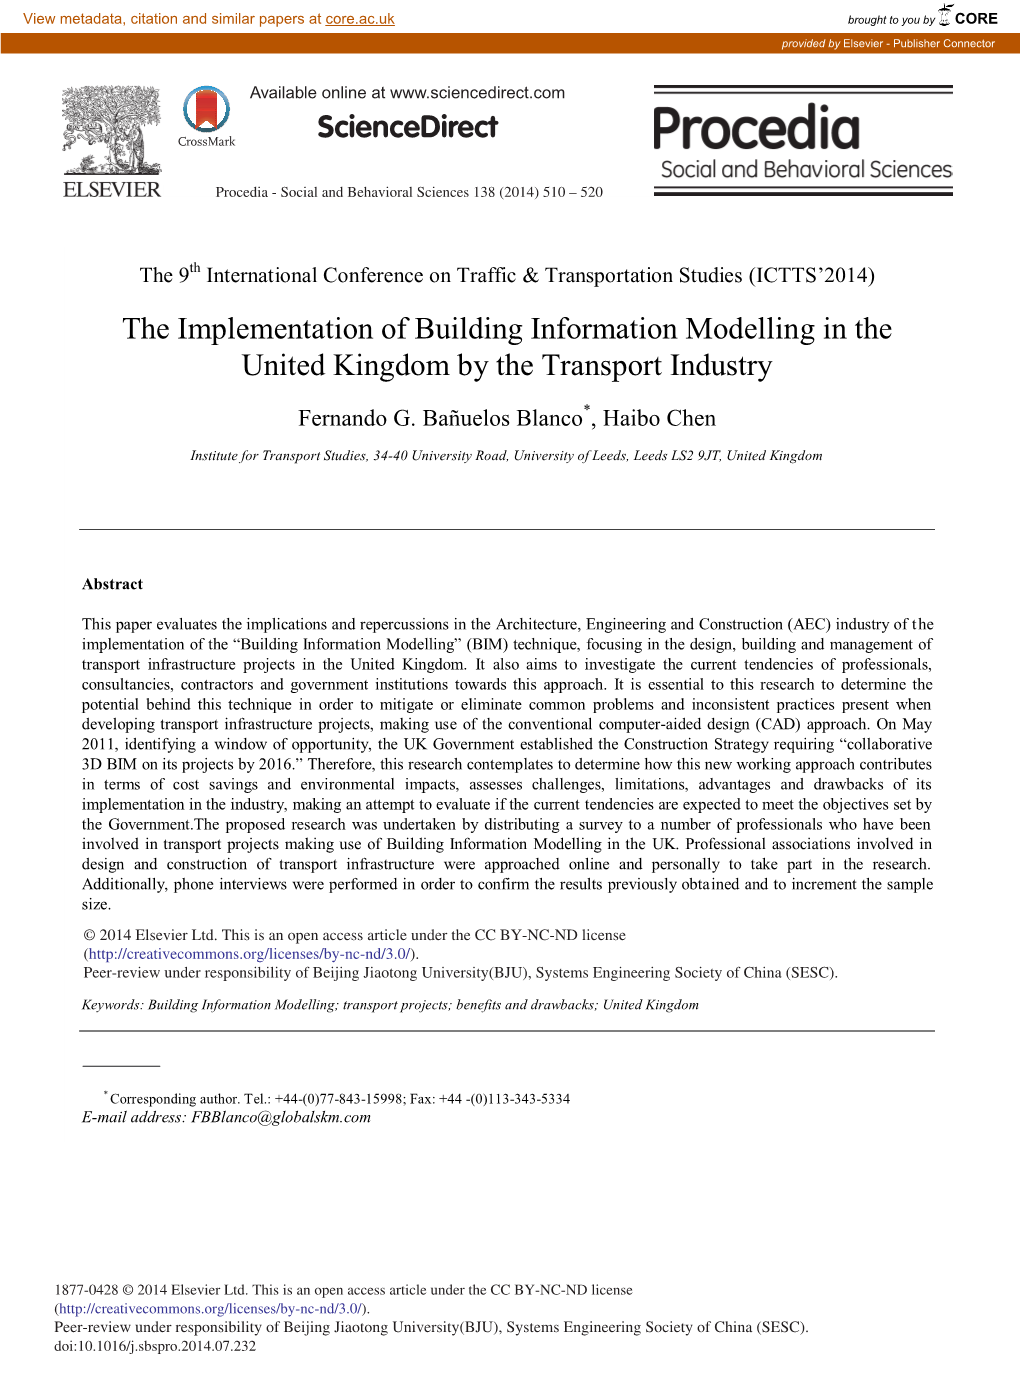 The Implementation of Building Information Modelling in the United Kingdom by the Transport Industry